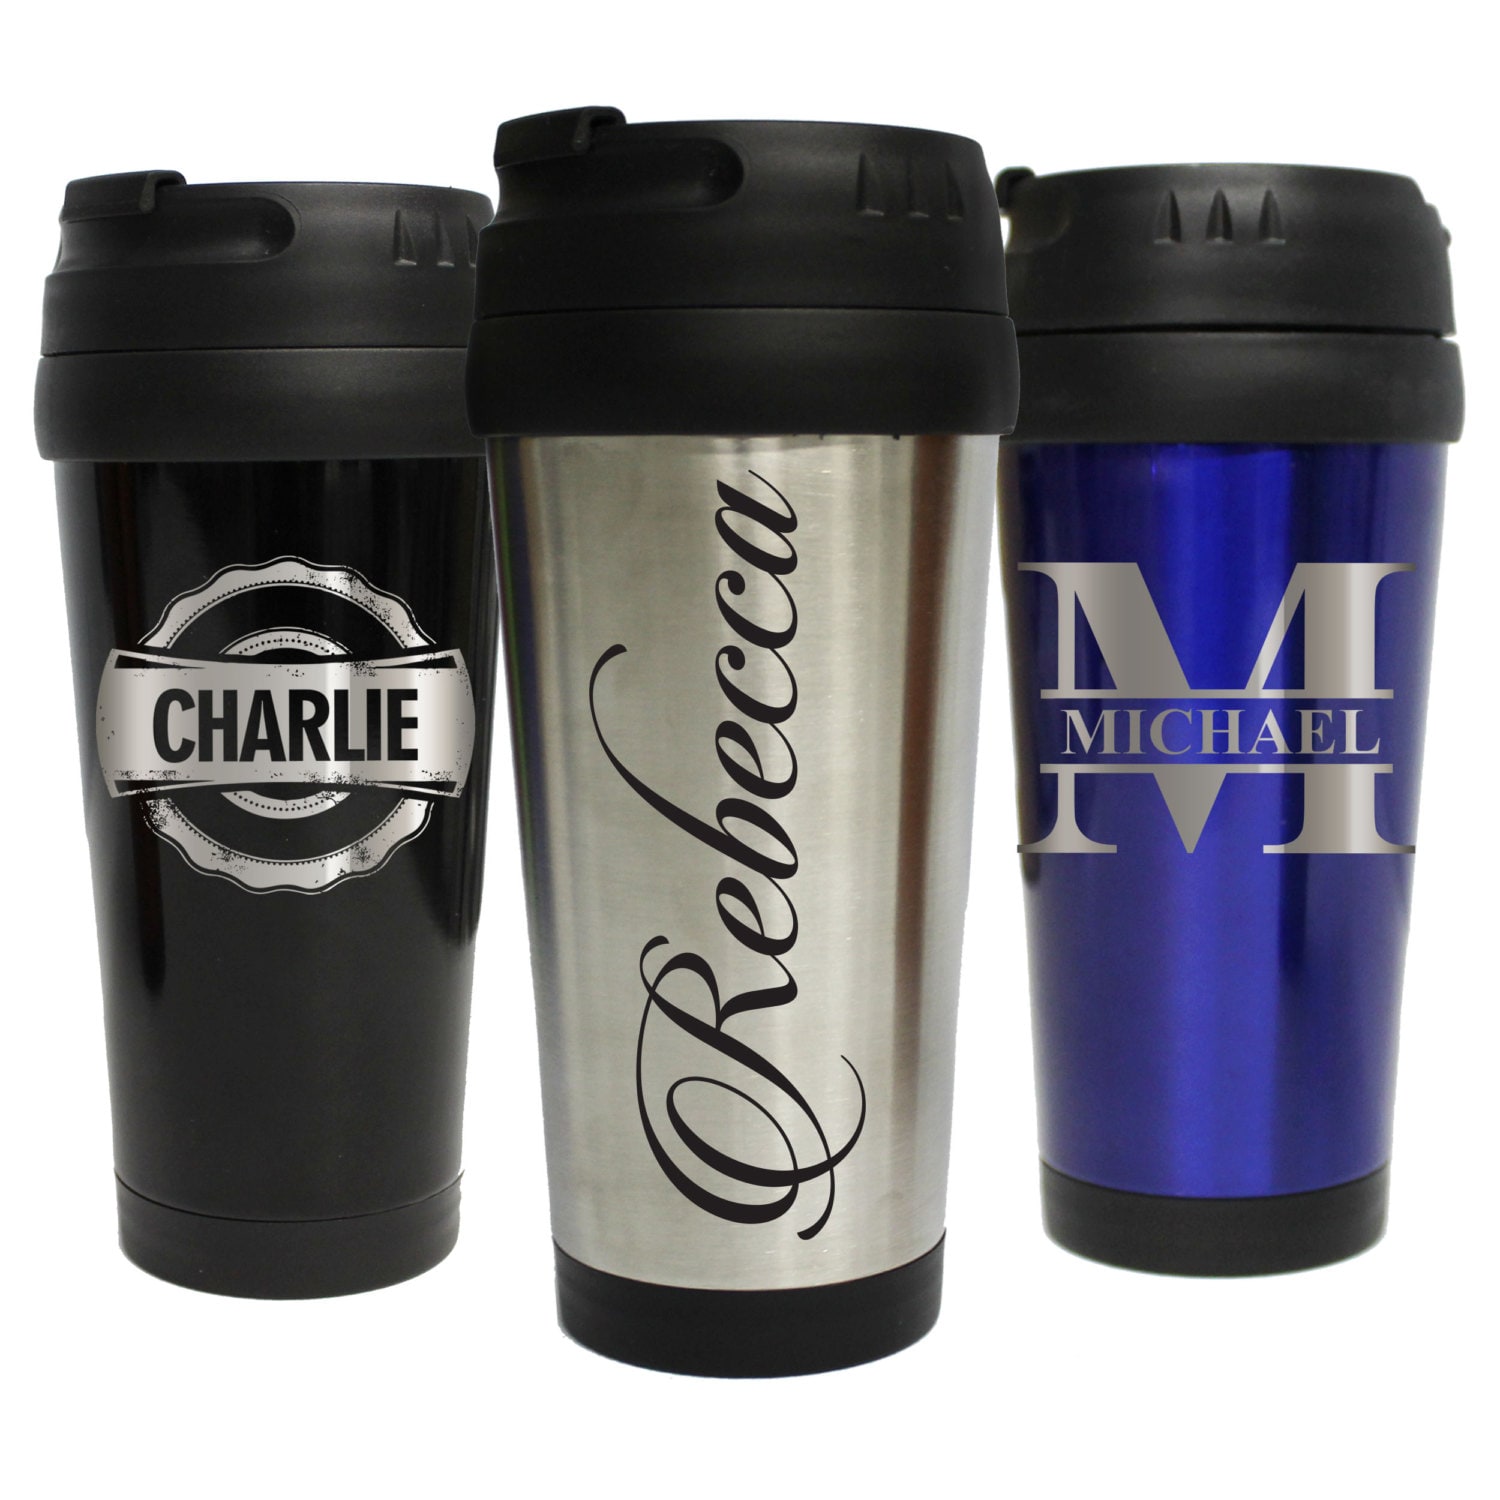 Multicolor Travel Mugs Idea Cafe No-Spill Cup, Packaging Type: Box